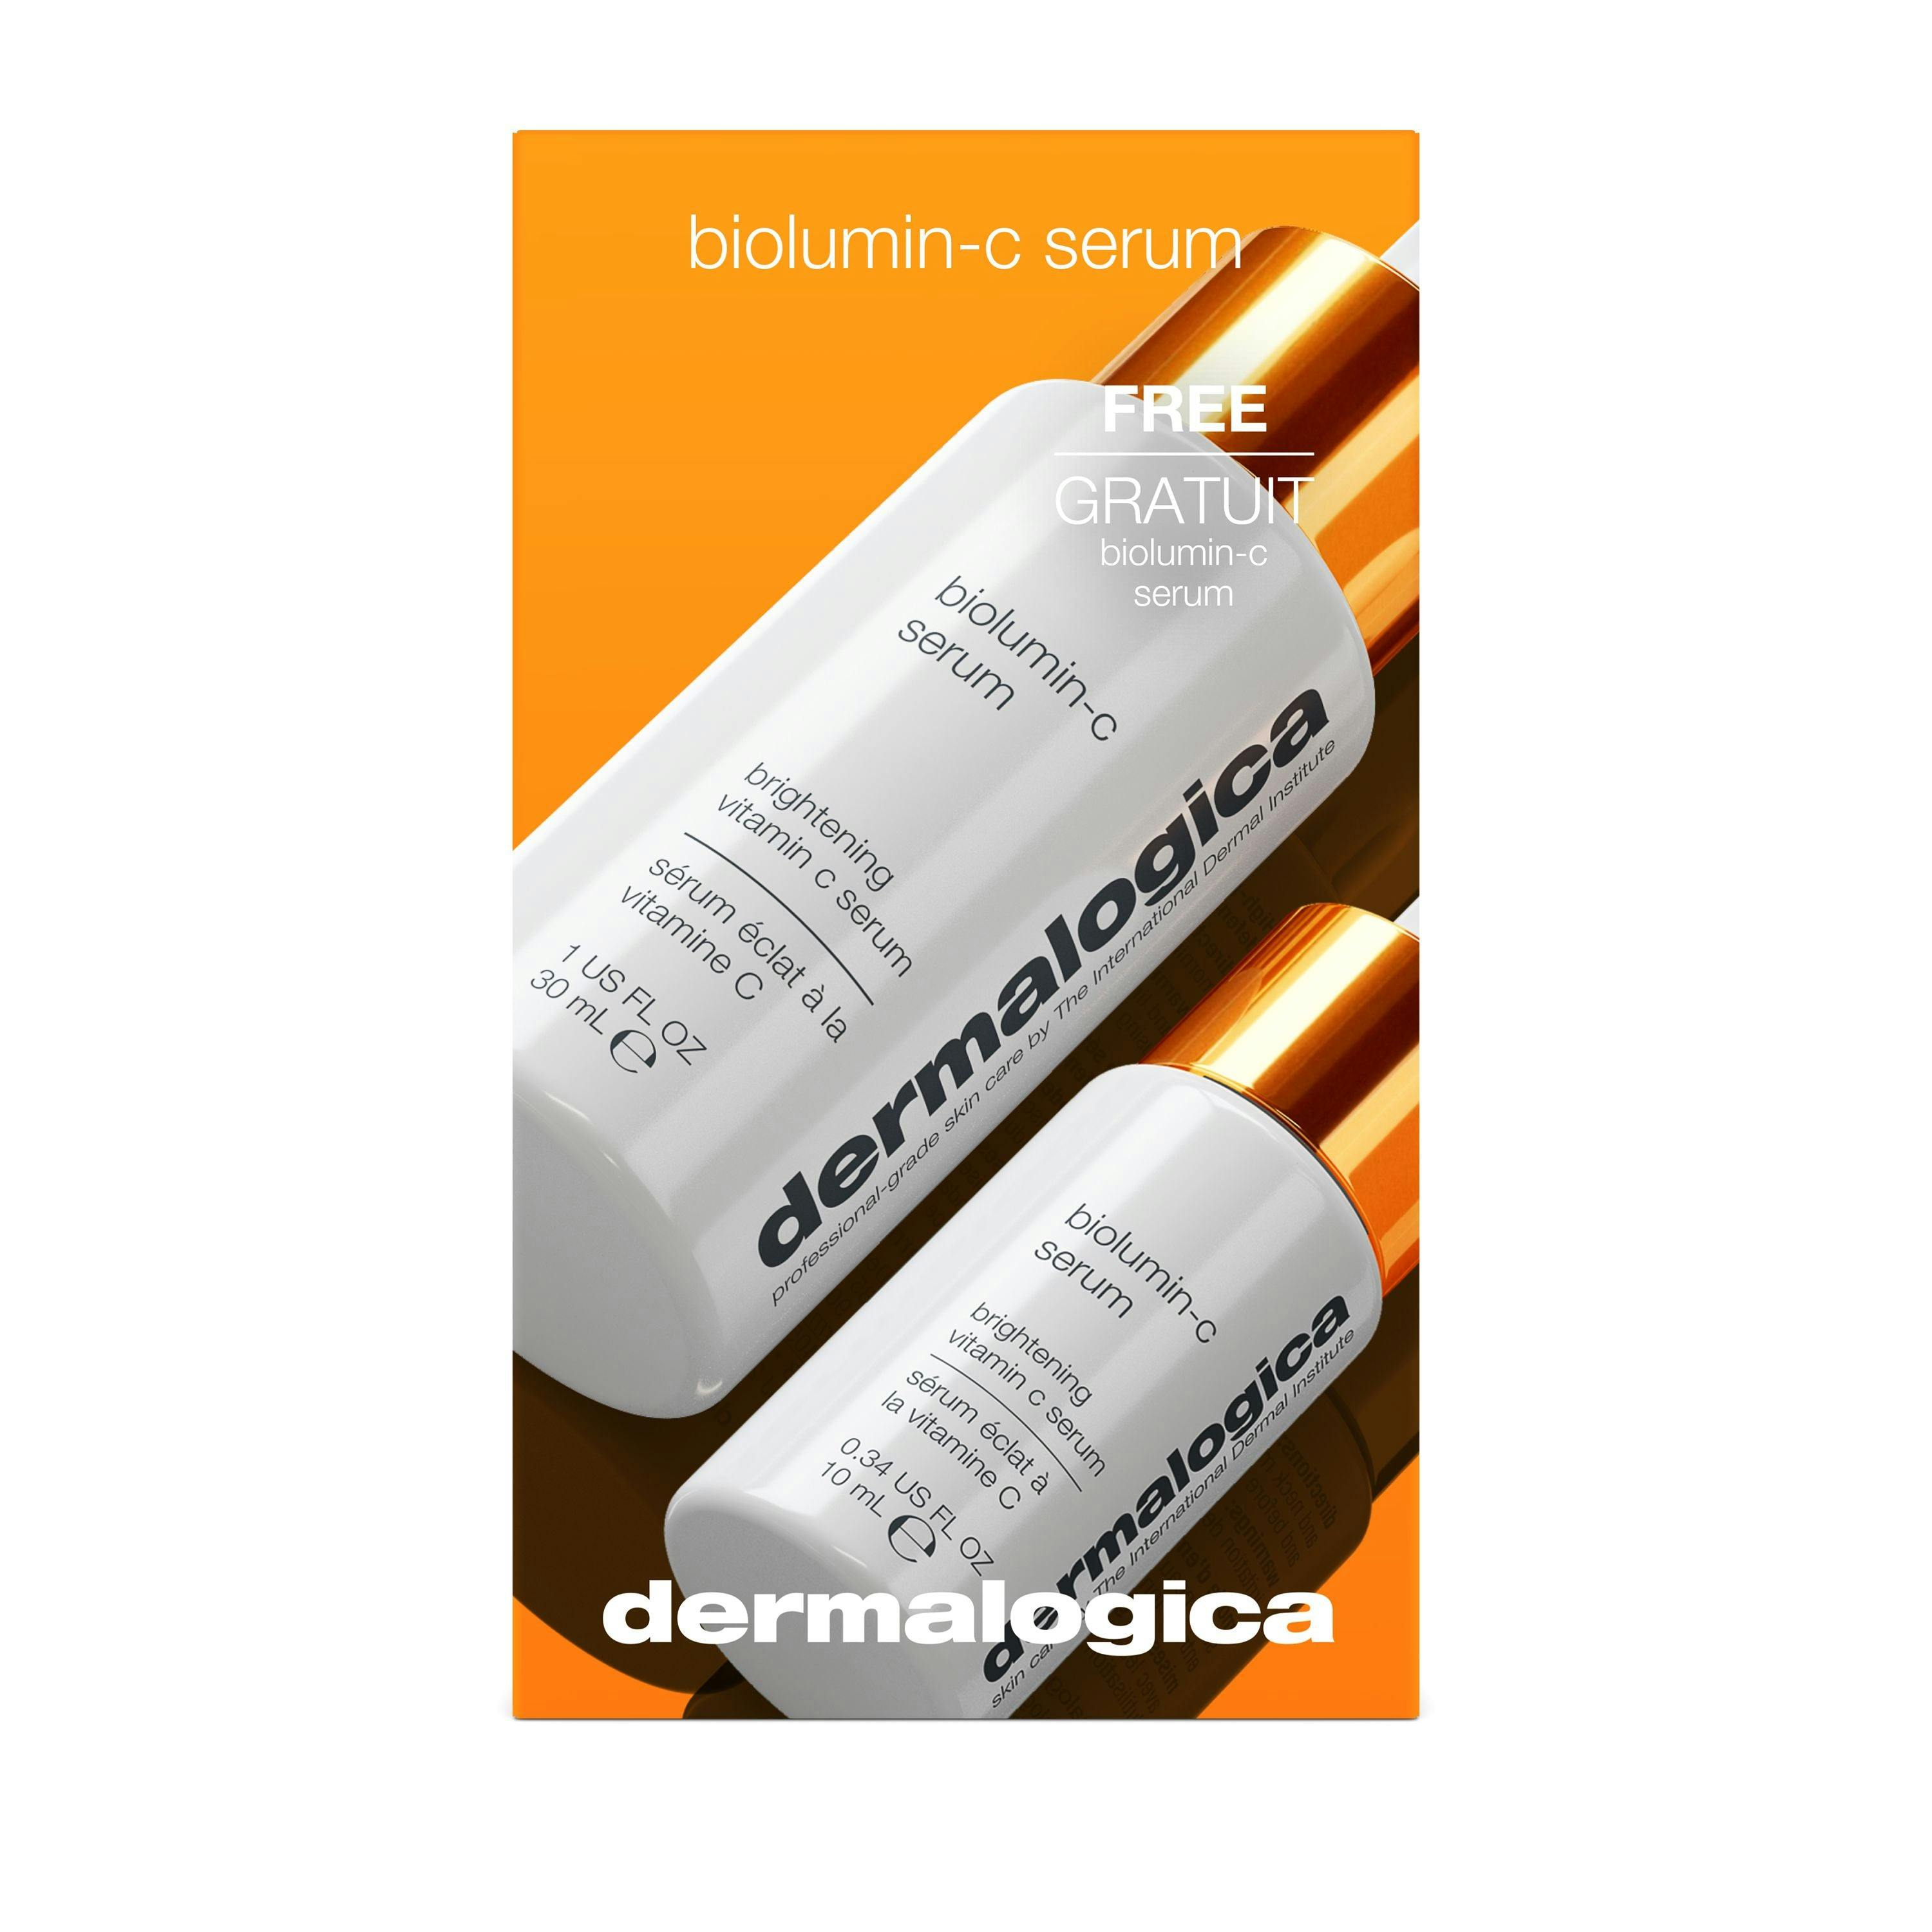 Dermalogica The Ultimate Glow Duo Pack